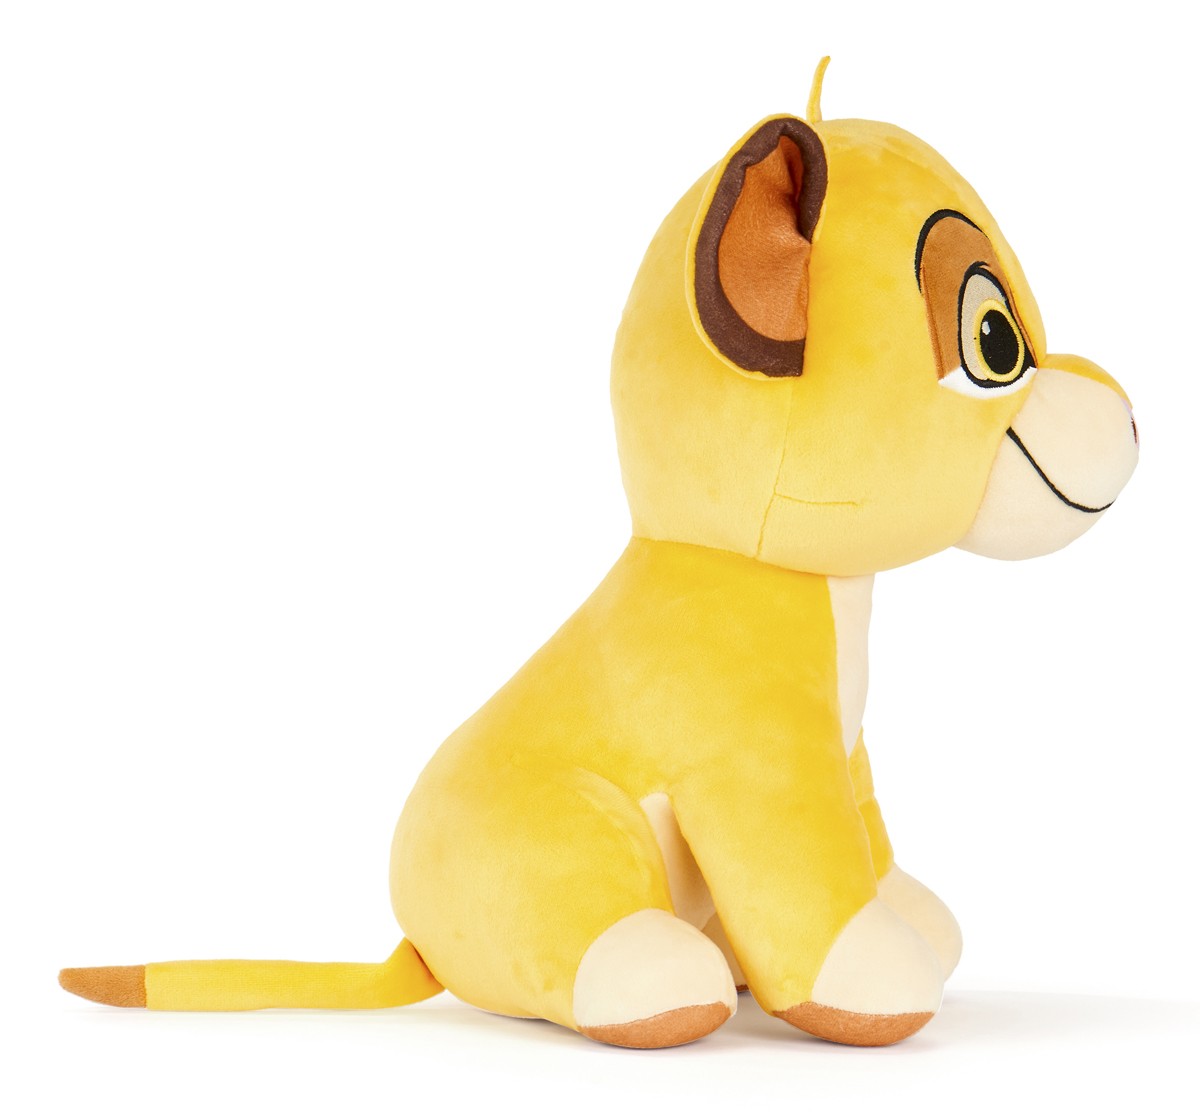 Disney Classic Simba 12 Inch Soft Toy for Kids, Multicolor 2Y+